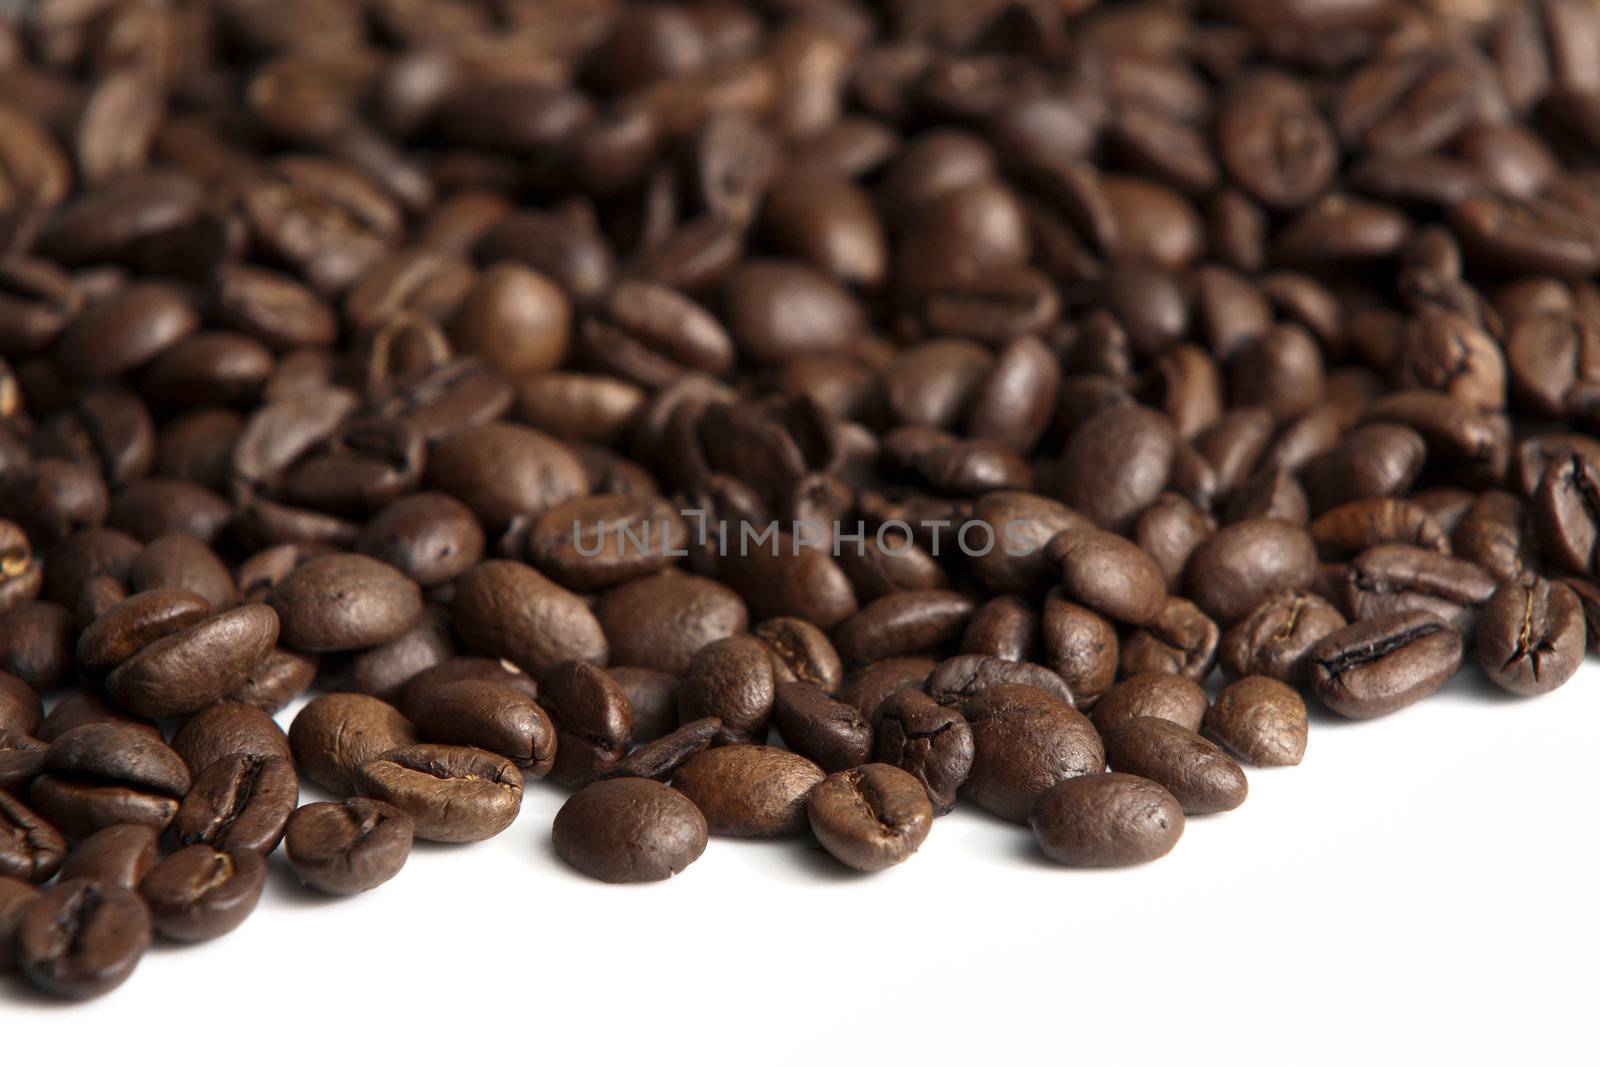 Roasted coffee beans on white background. Shallow depth of field